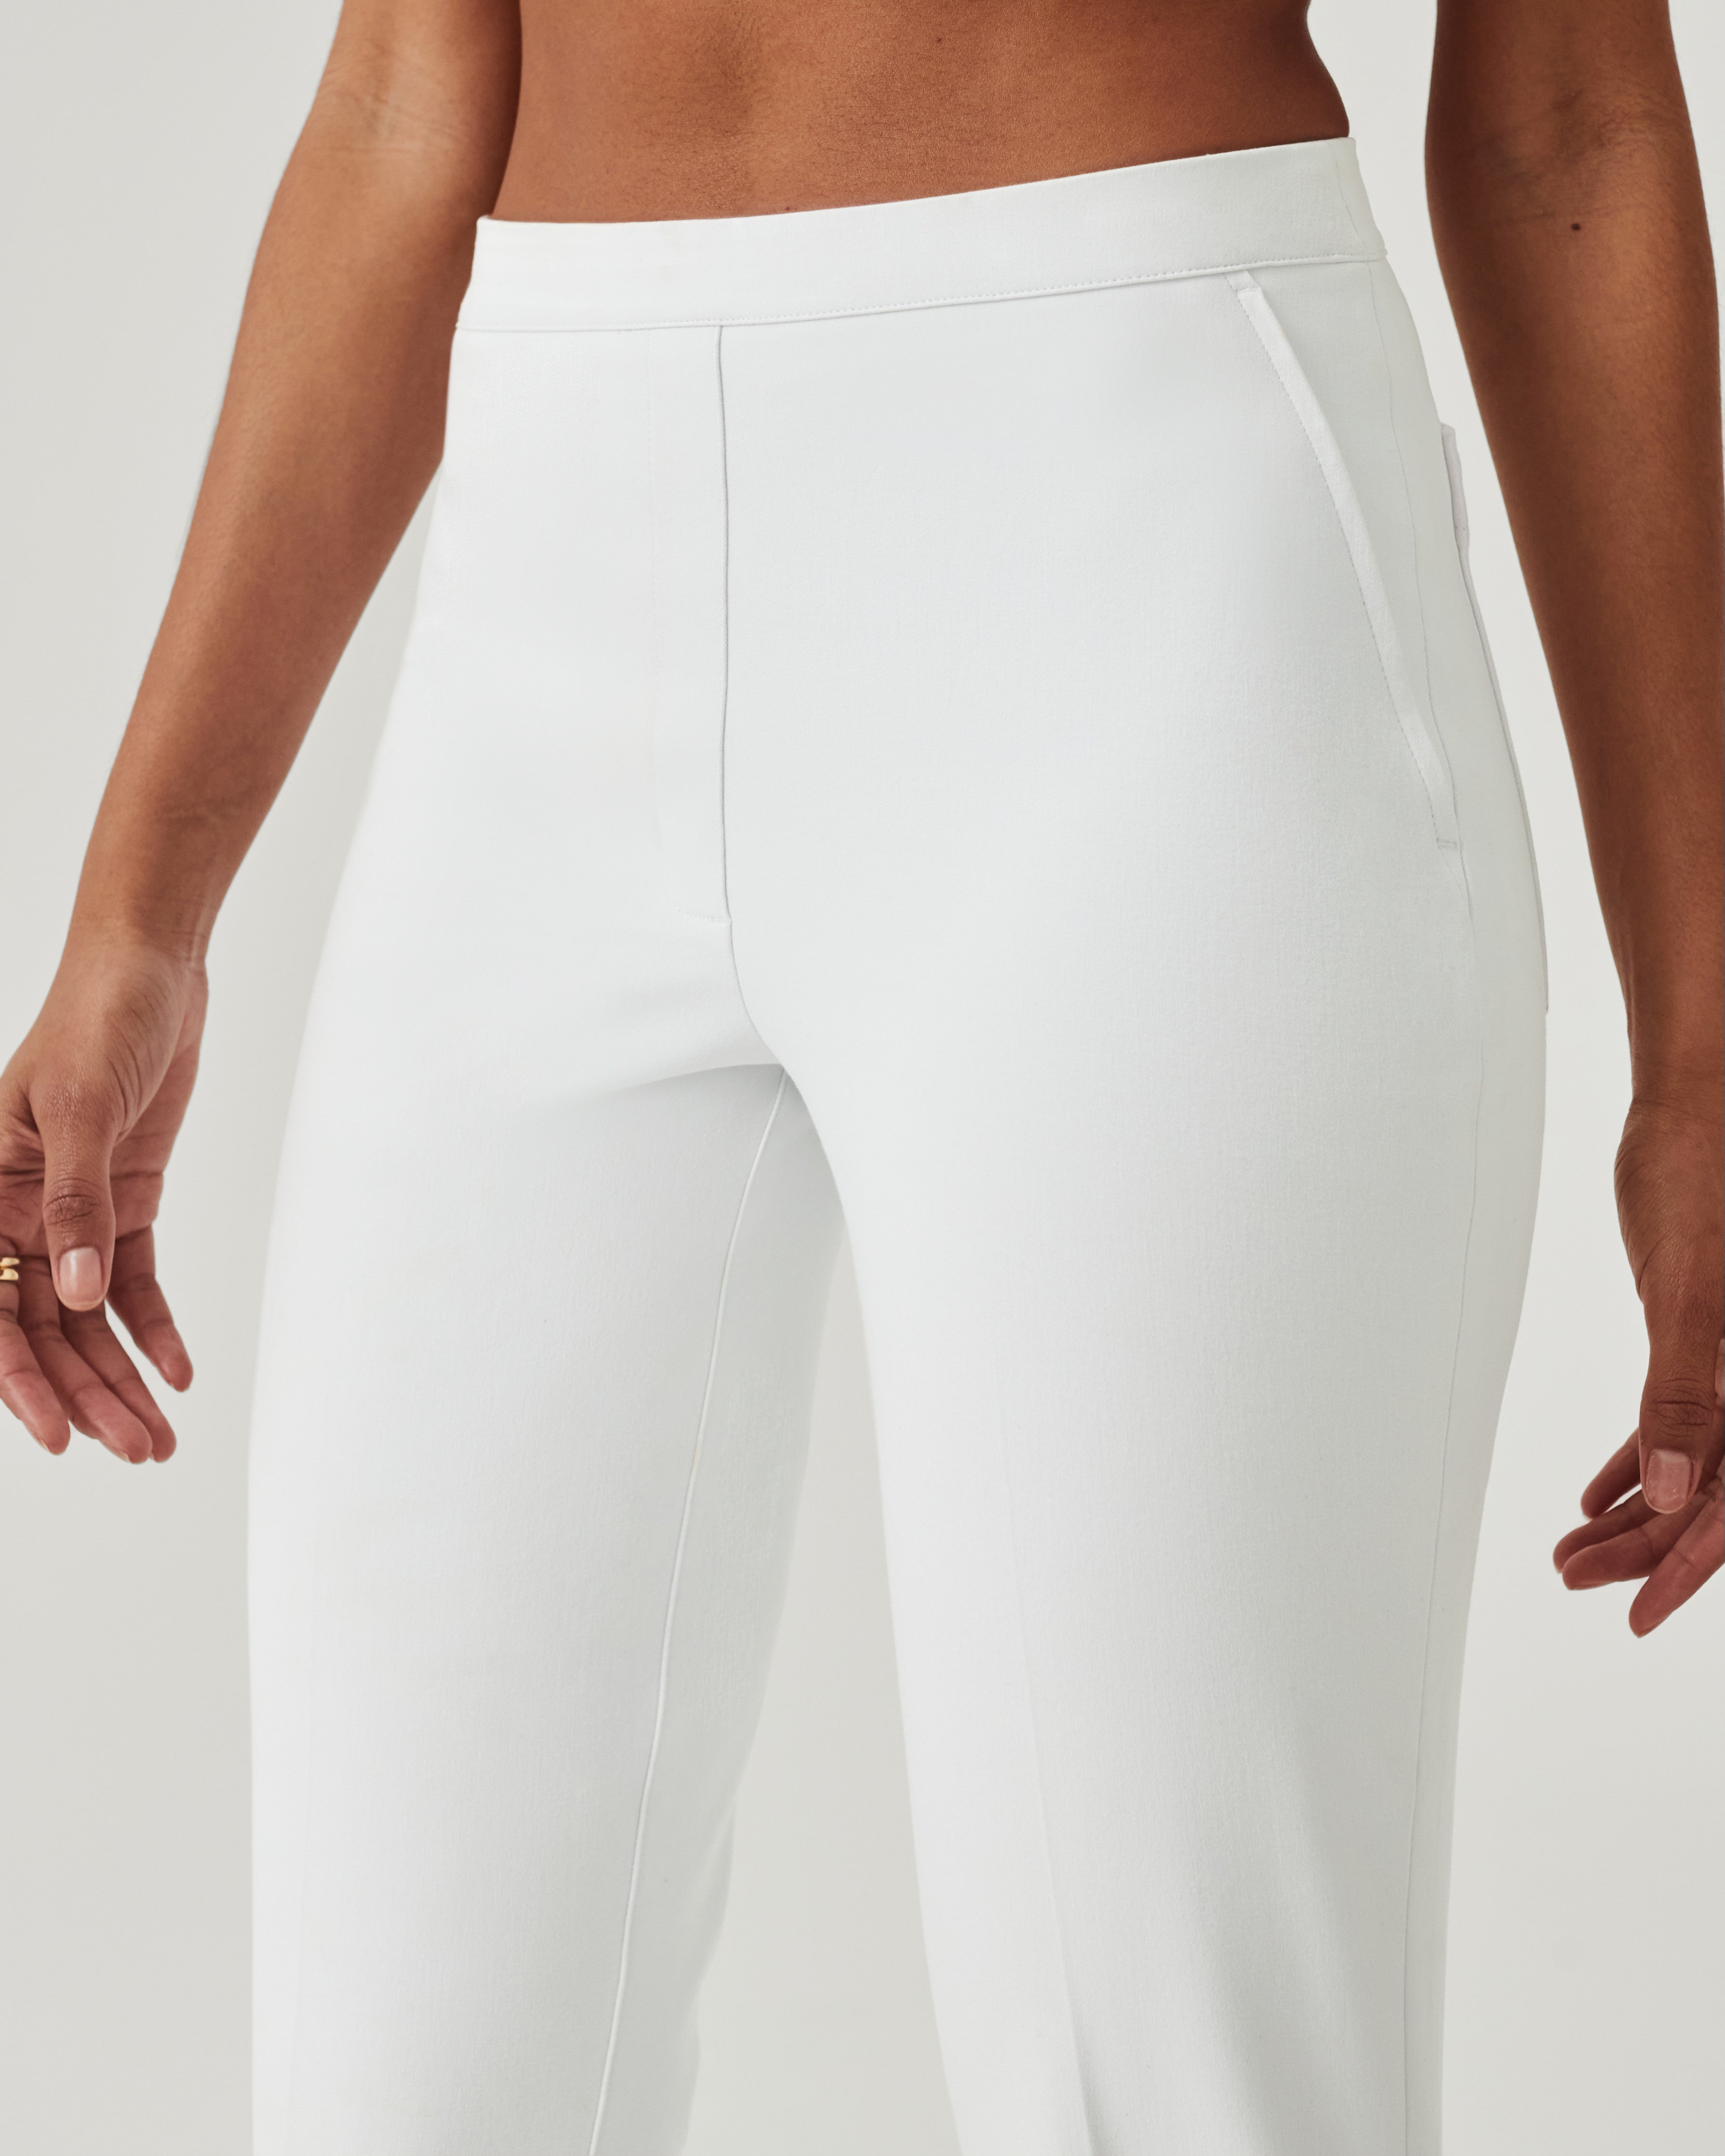 Seamless Cooling Slim And Lift Shaping Pants - AIR SPACE